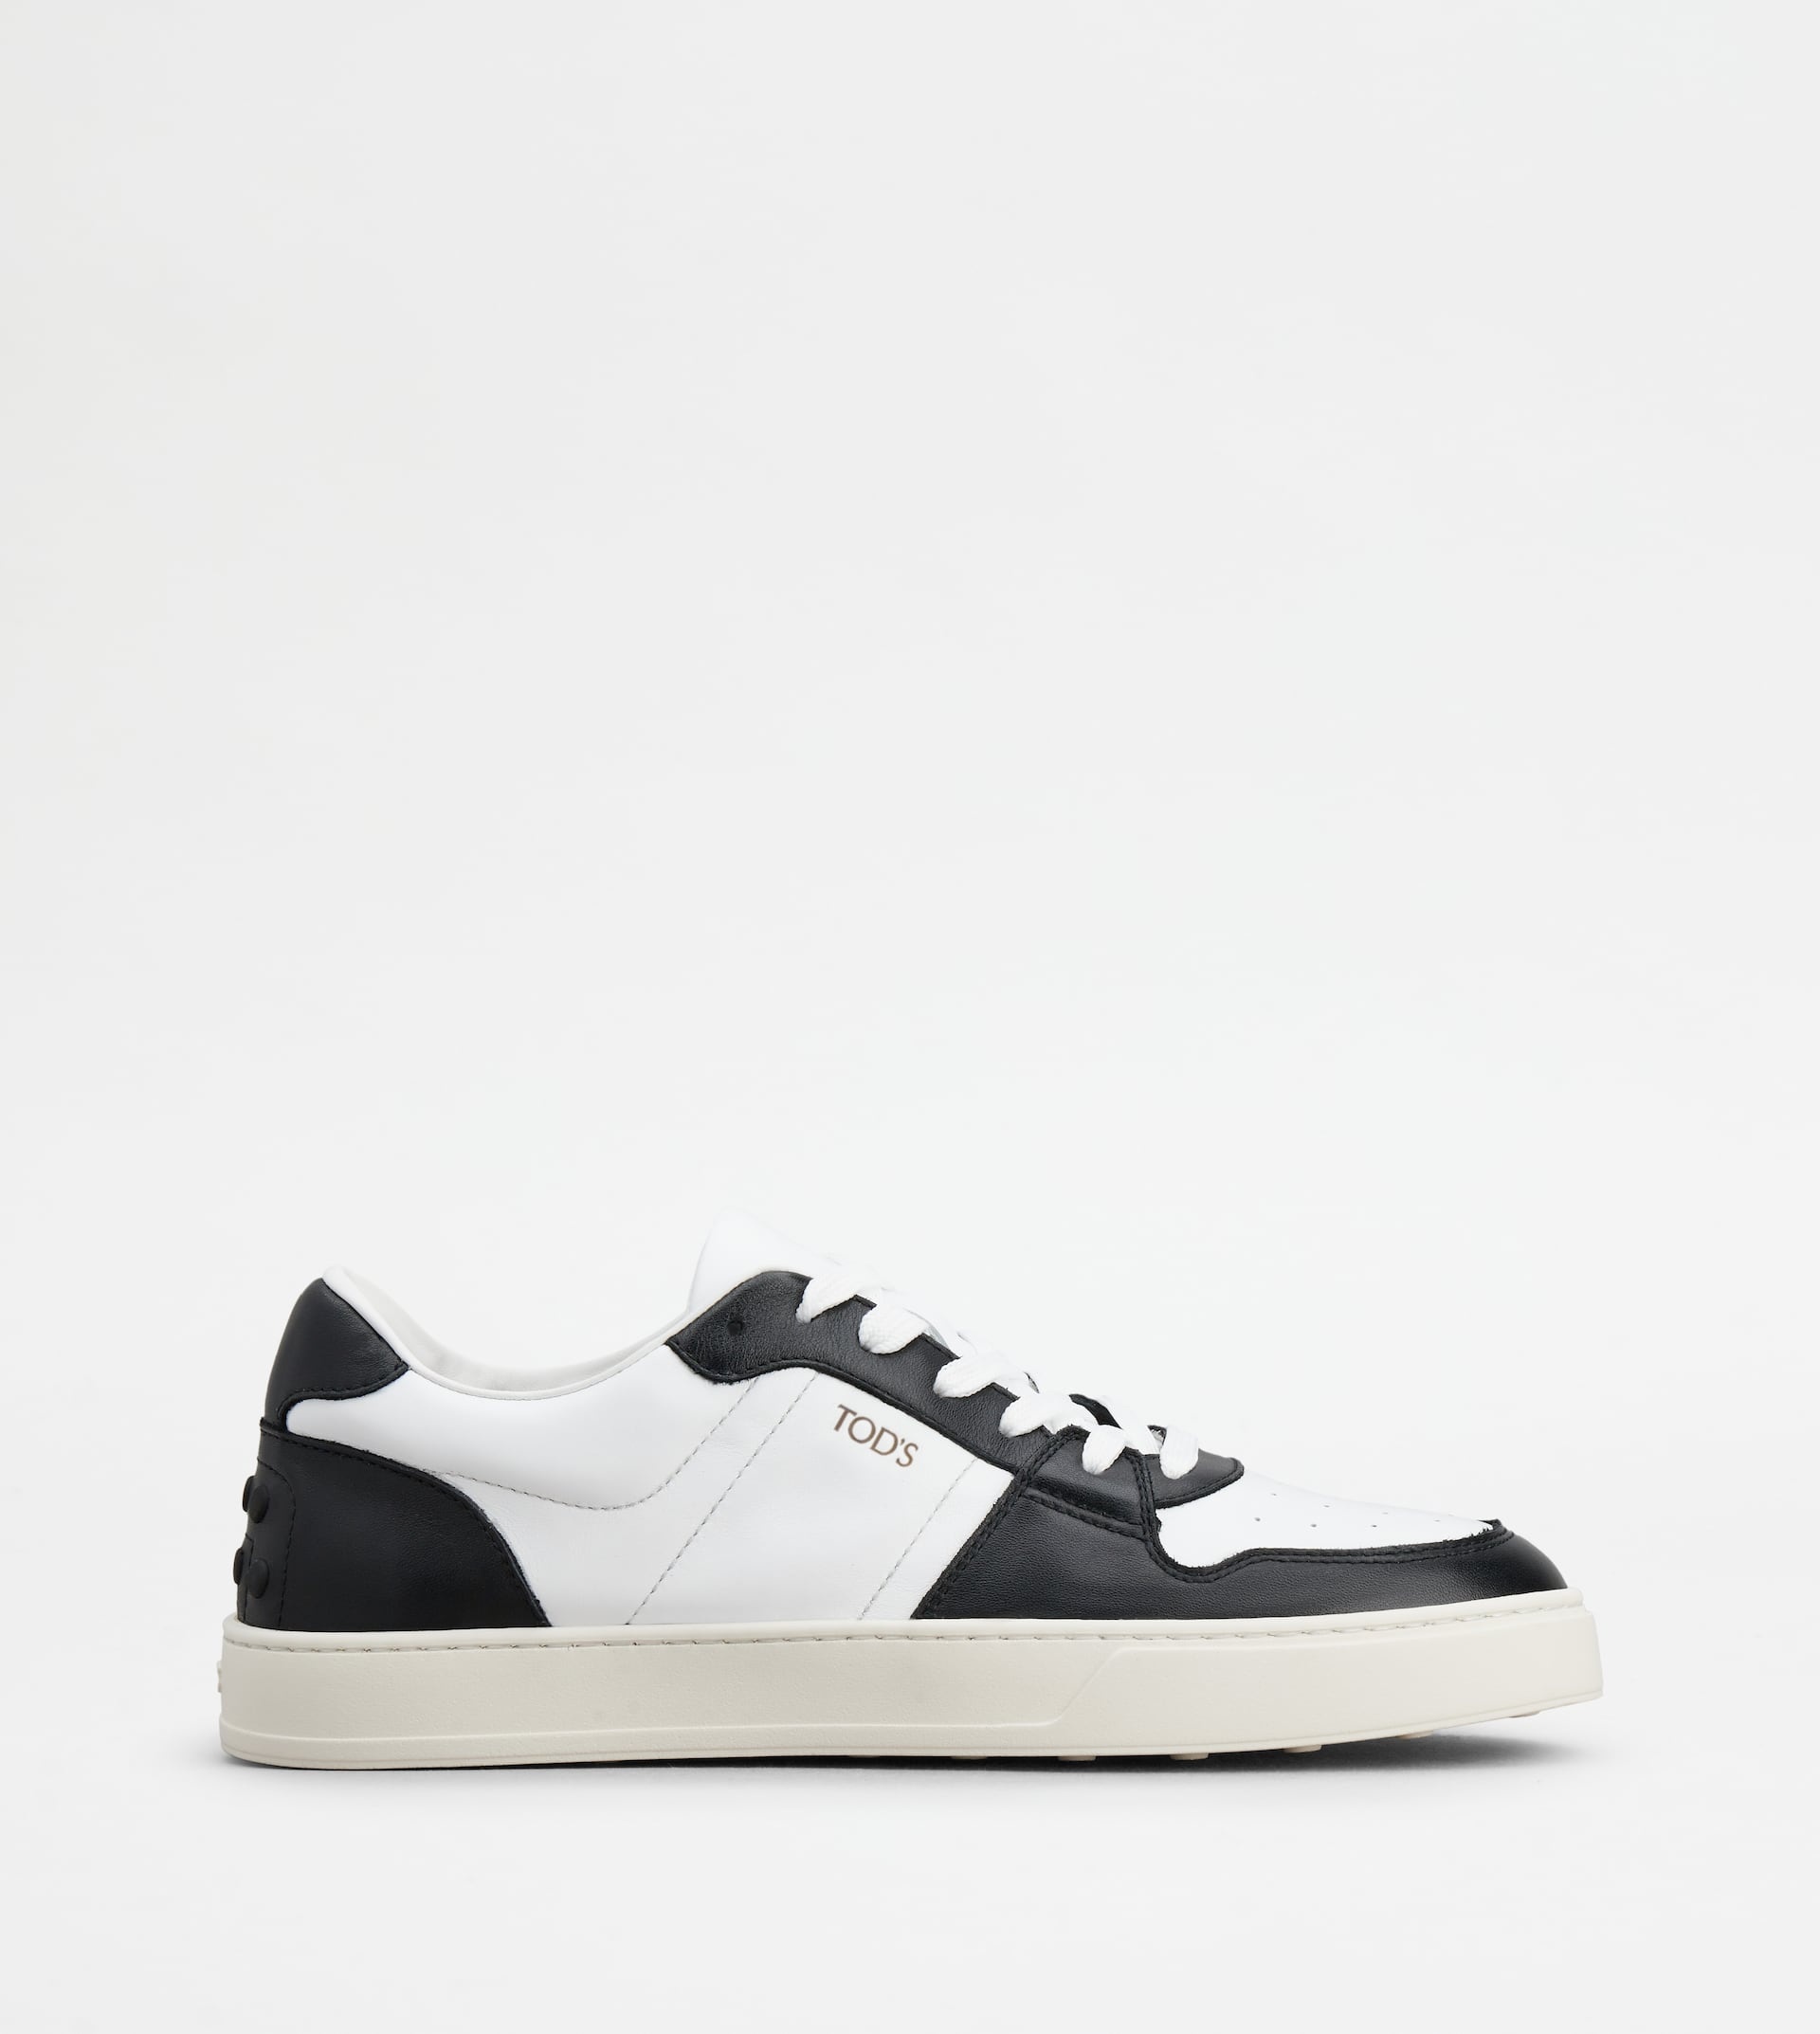 SNEAKERS IN LEATHER - WHITE, BLACK - 1